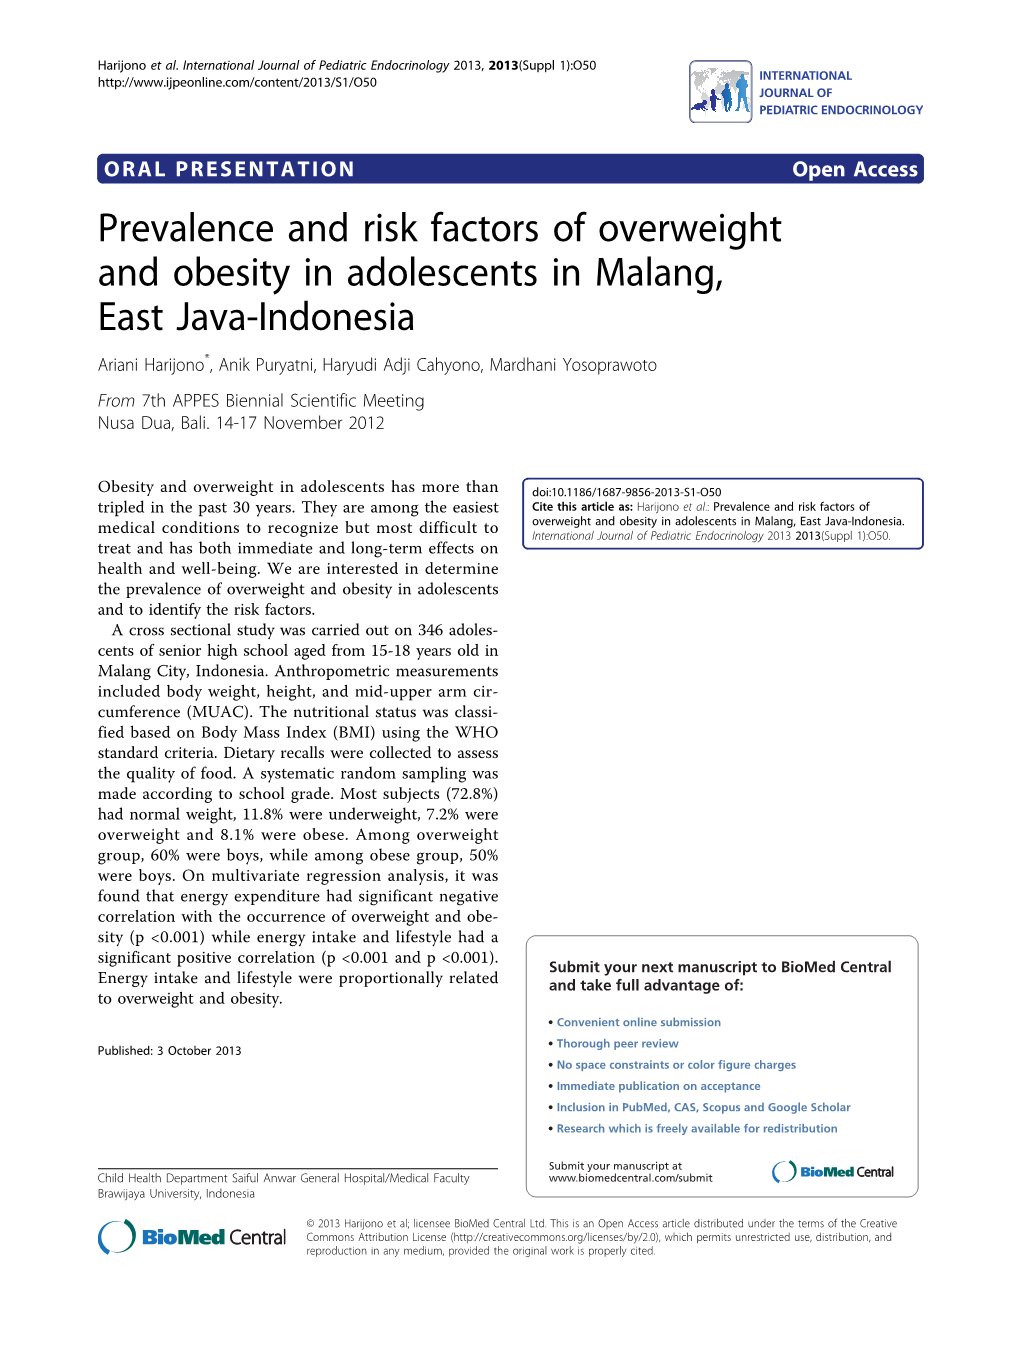 Prevalence and Risk Factors of Overweight and Obesity In